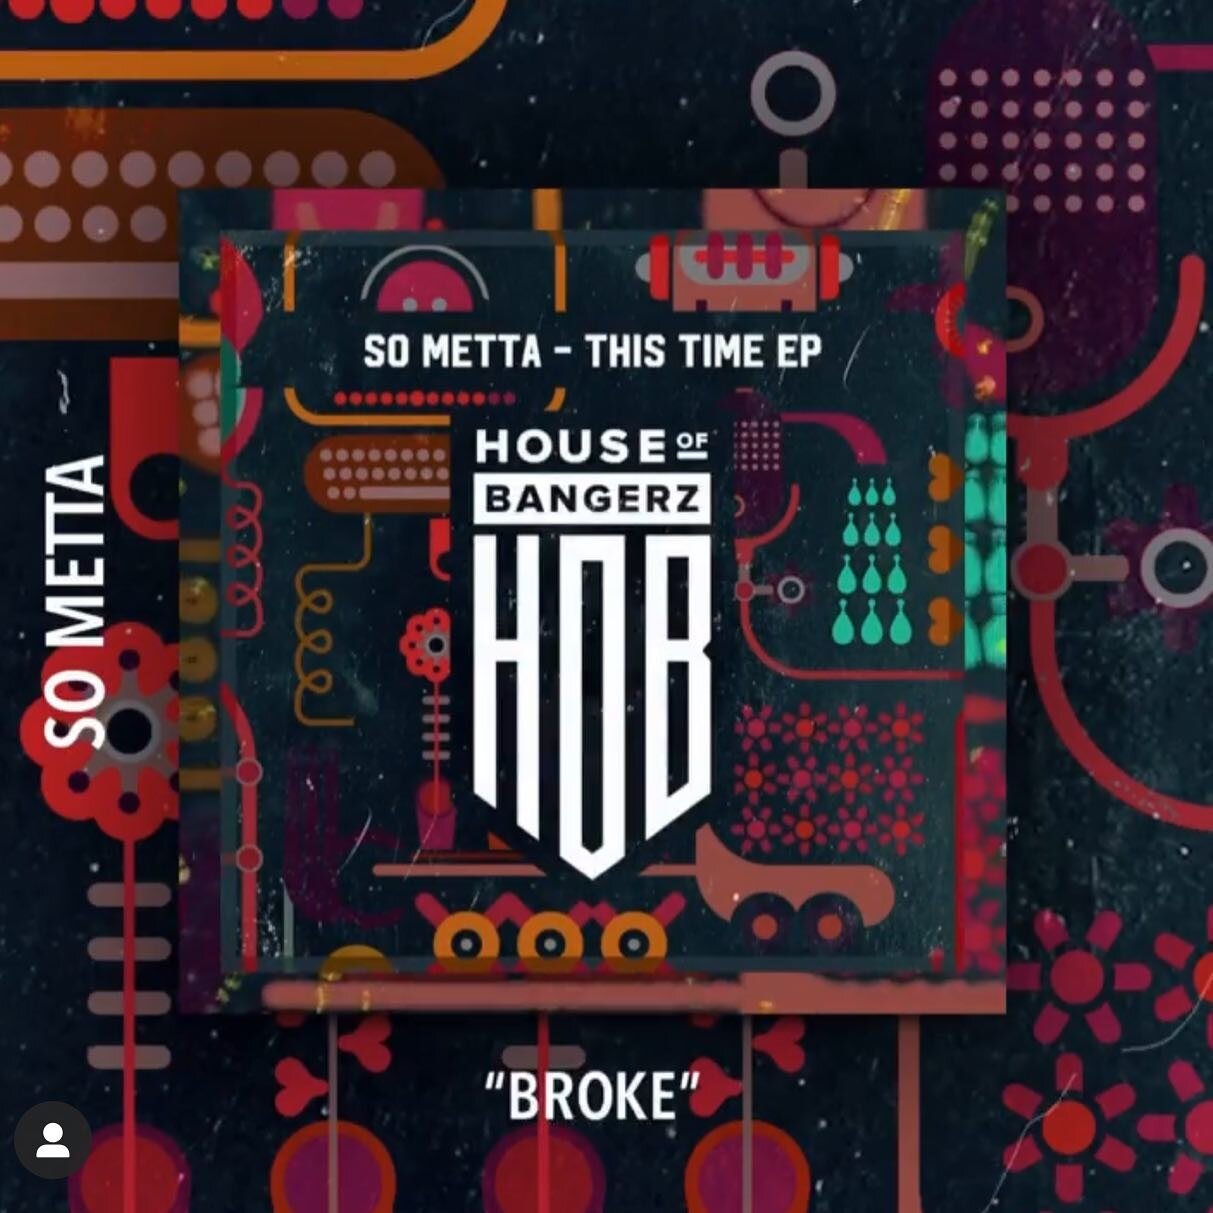 Check out @so_metta_house new EP &ldquo;This Time&rdquo; out now! All the songs slap!! 

I&rsquo;m feature on Broke, give it a listen. (Link in bio)